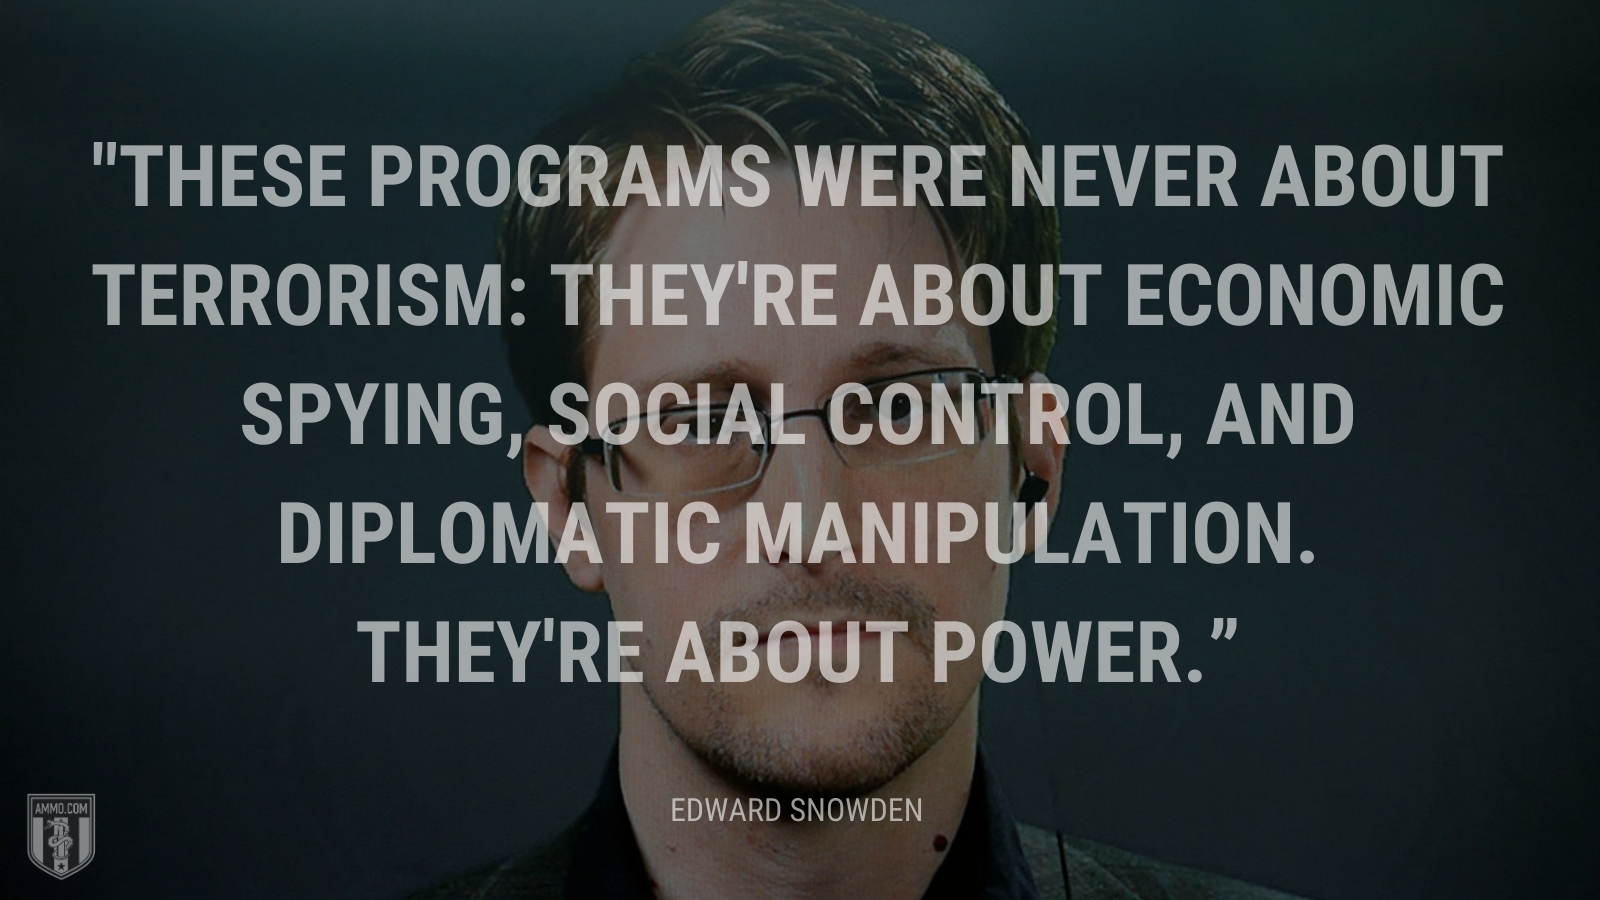 “These programs were never about terrorism: they're about economic spying, social control, and diplomatic manipulation. They're about power.” - Edward Snowden